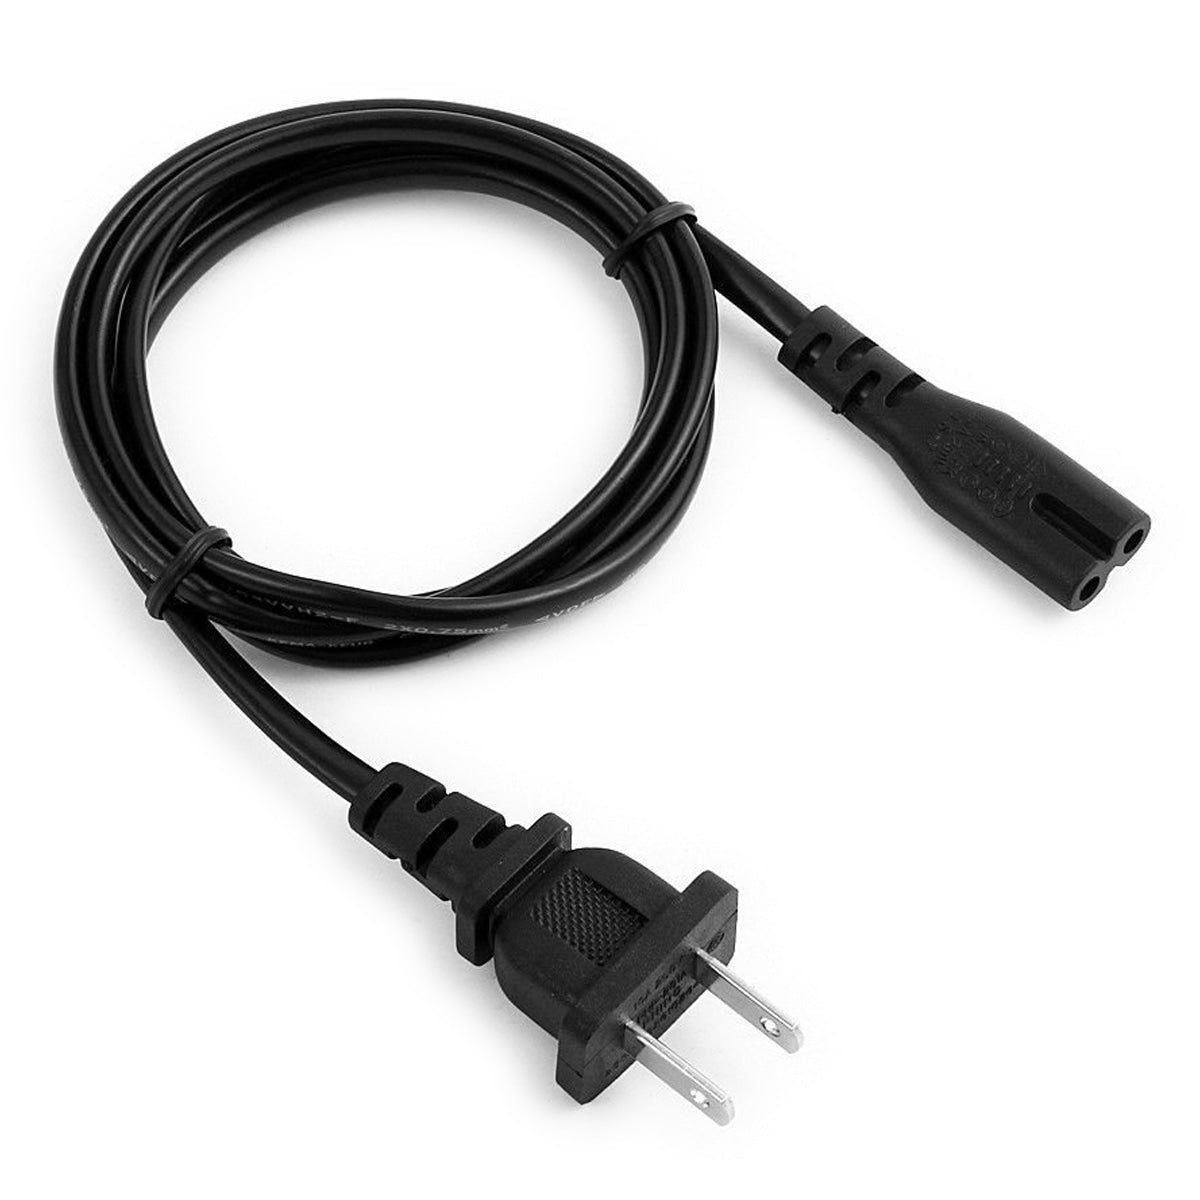 AC Power Cord for Various CPAP/BiPAP Machines